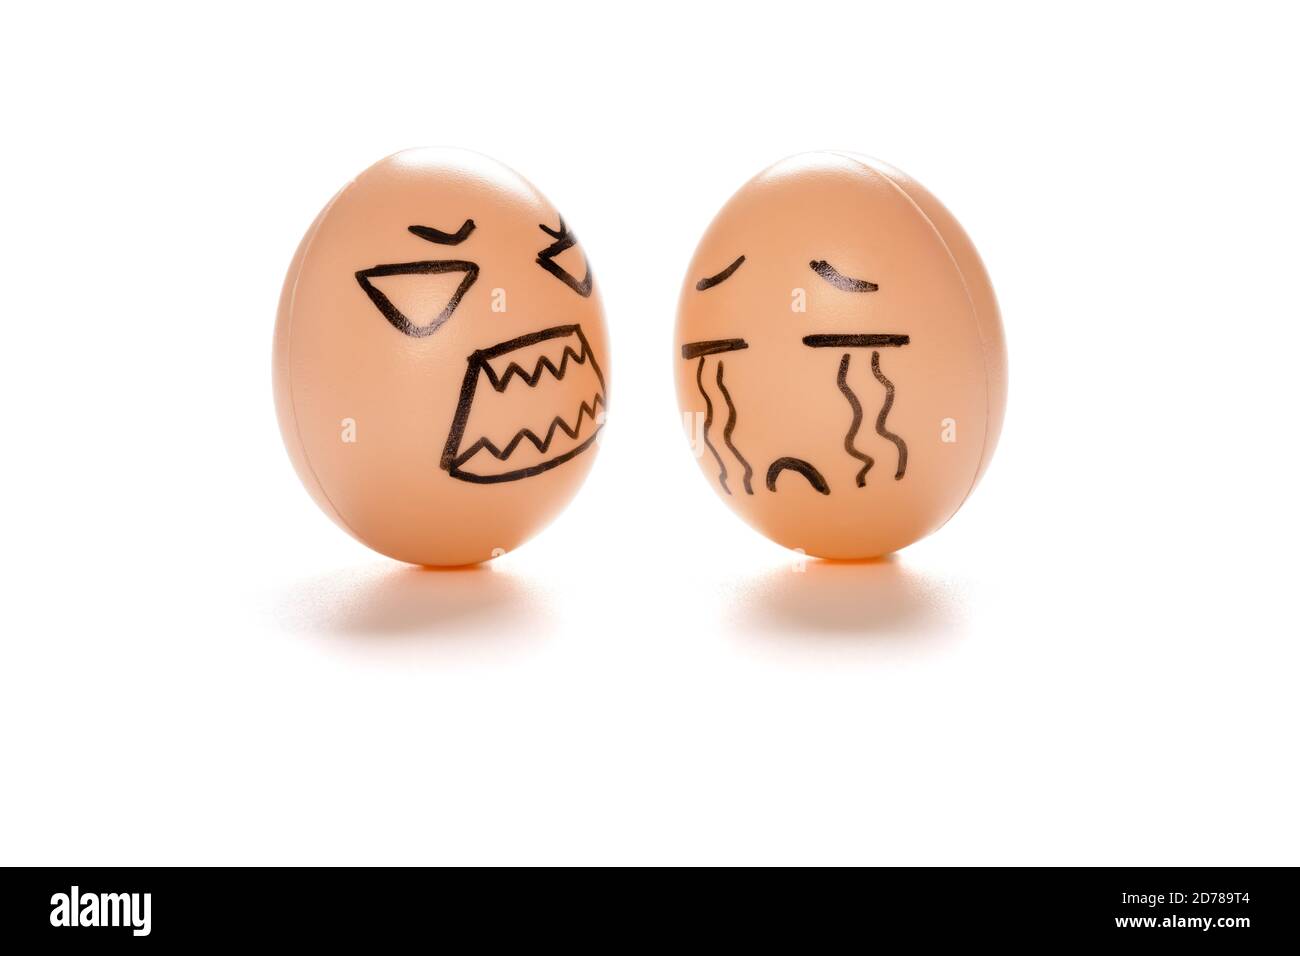 egg faces of an angry one blaming a crying one on white with clipping path Stock Photo